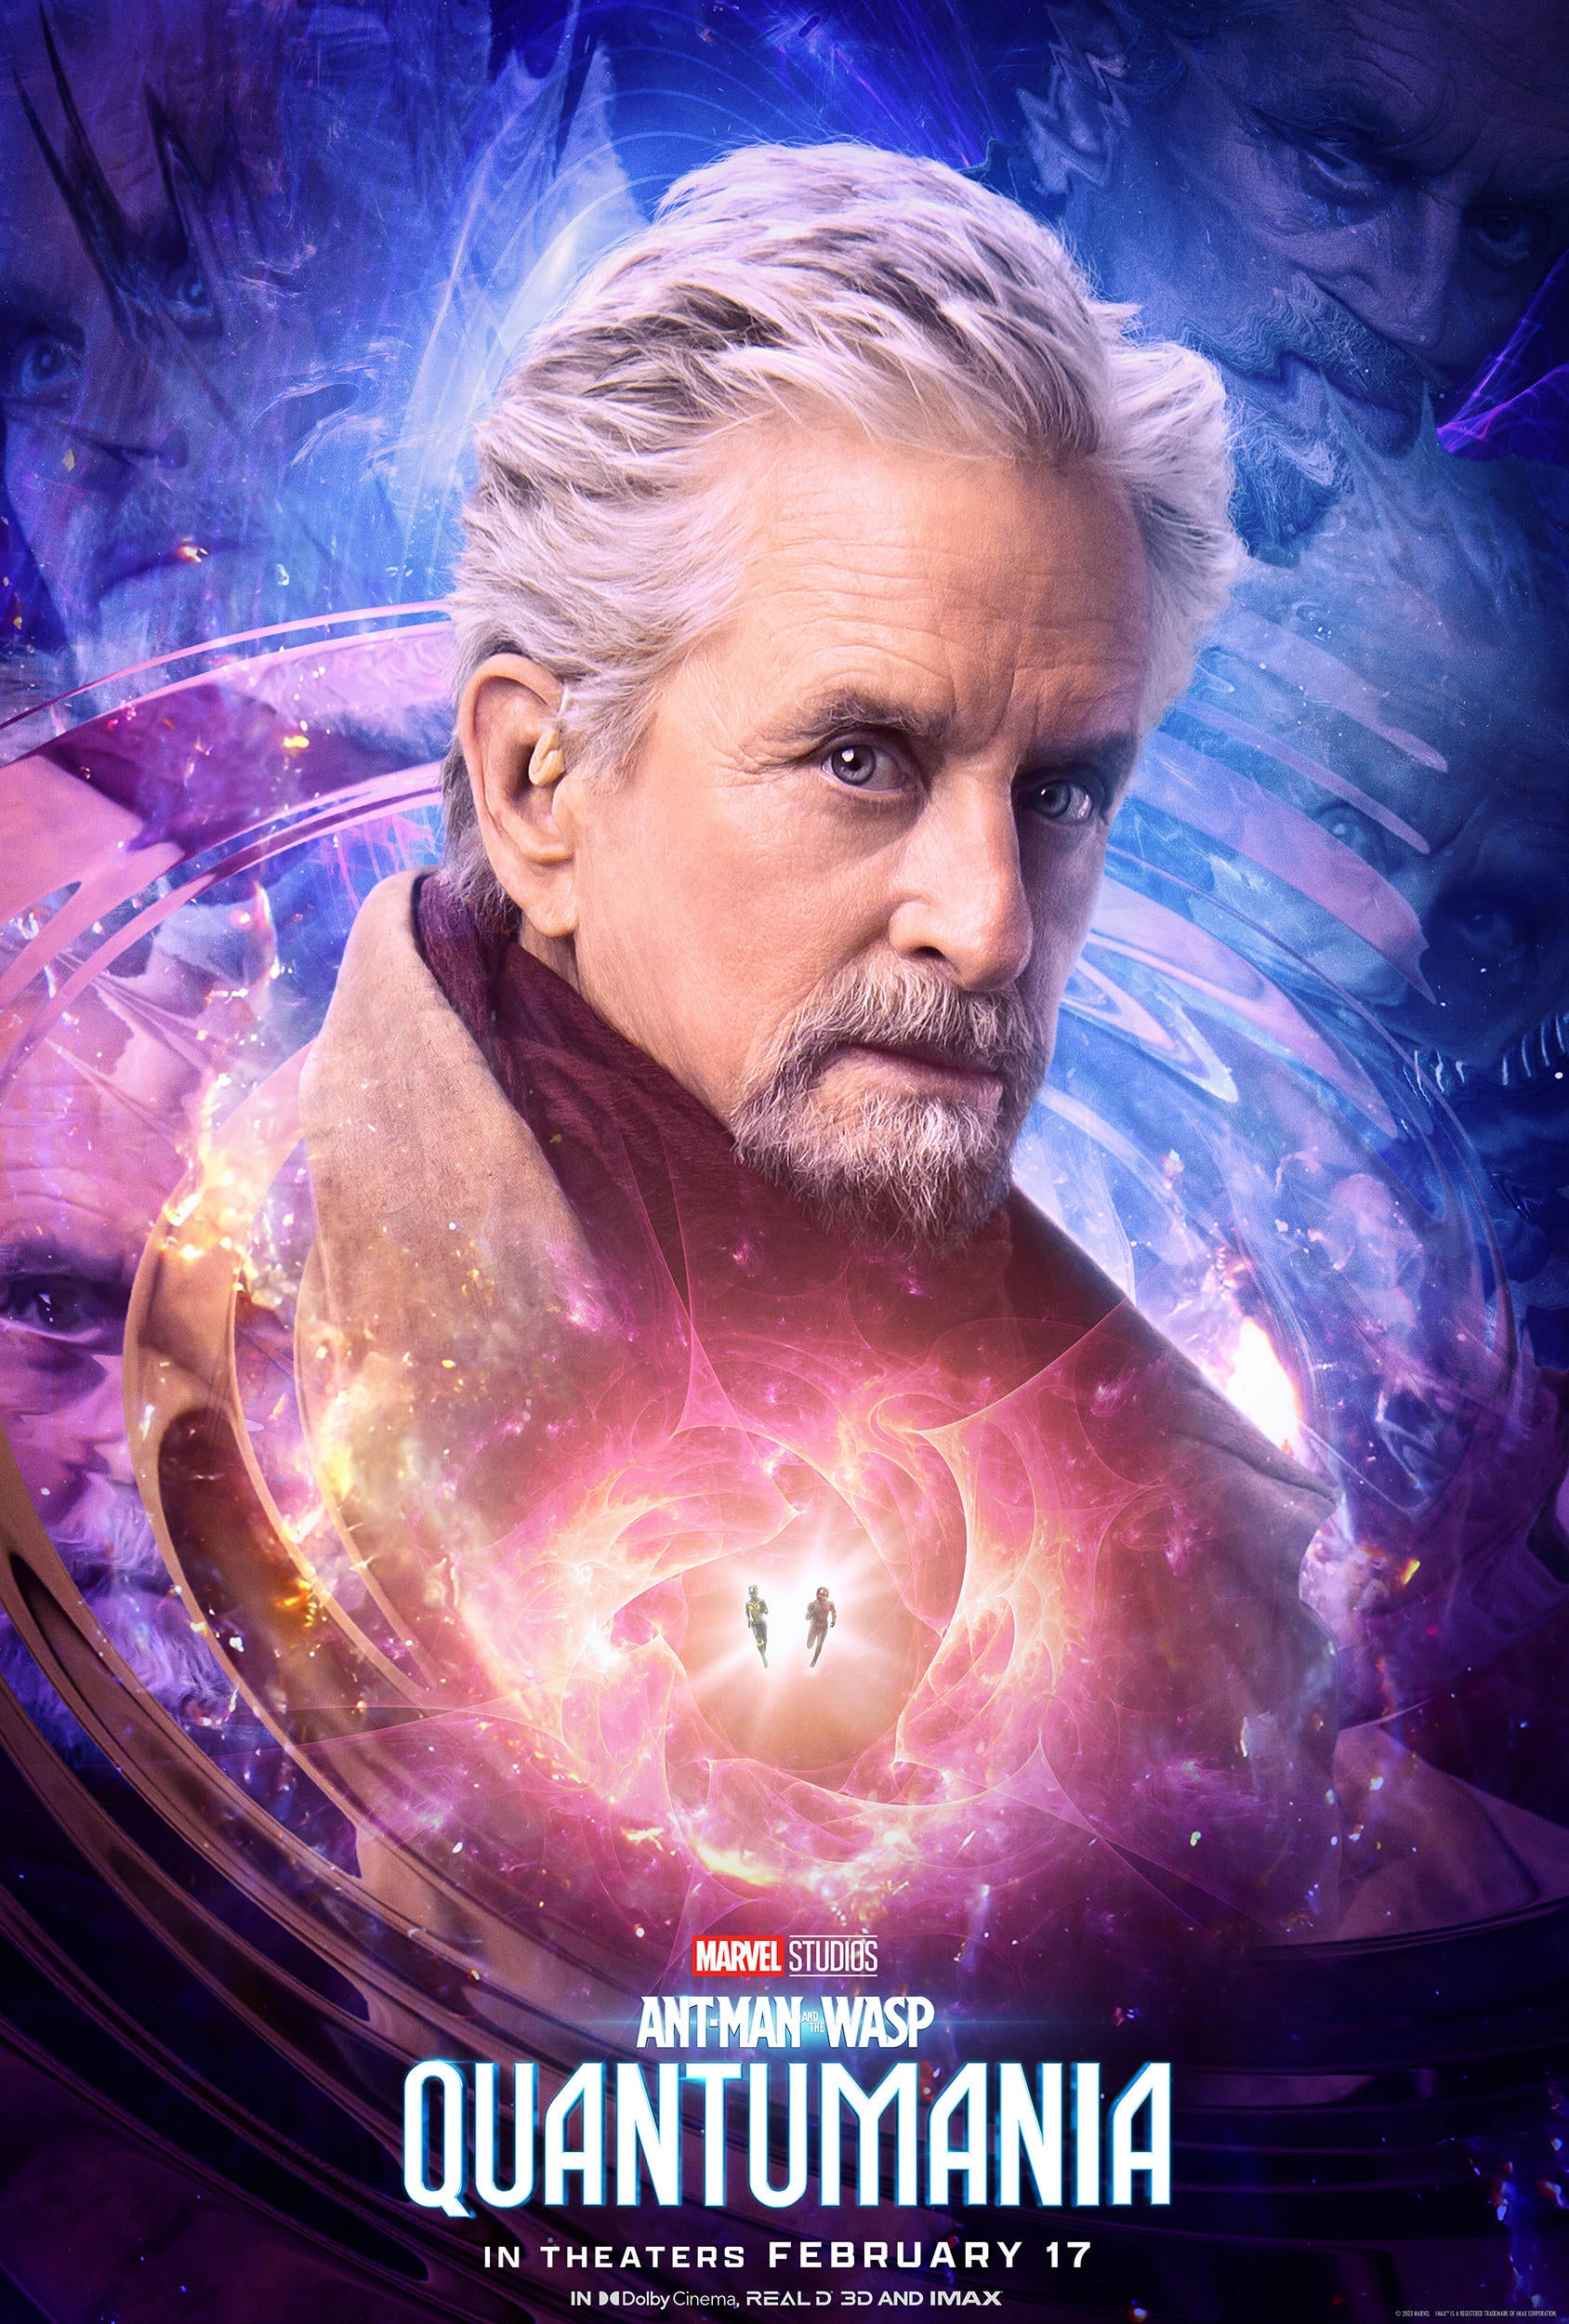 ant-man-and-the-wasp-quantumania-michael-douglas-hank-pym-poster.jpg